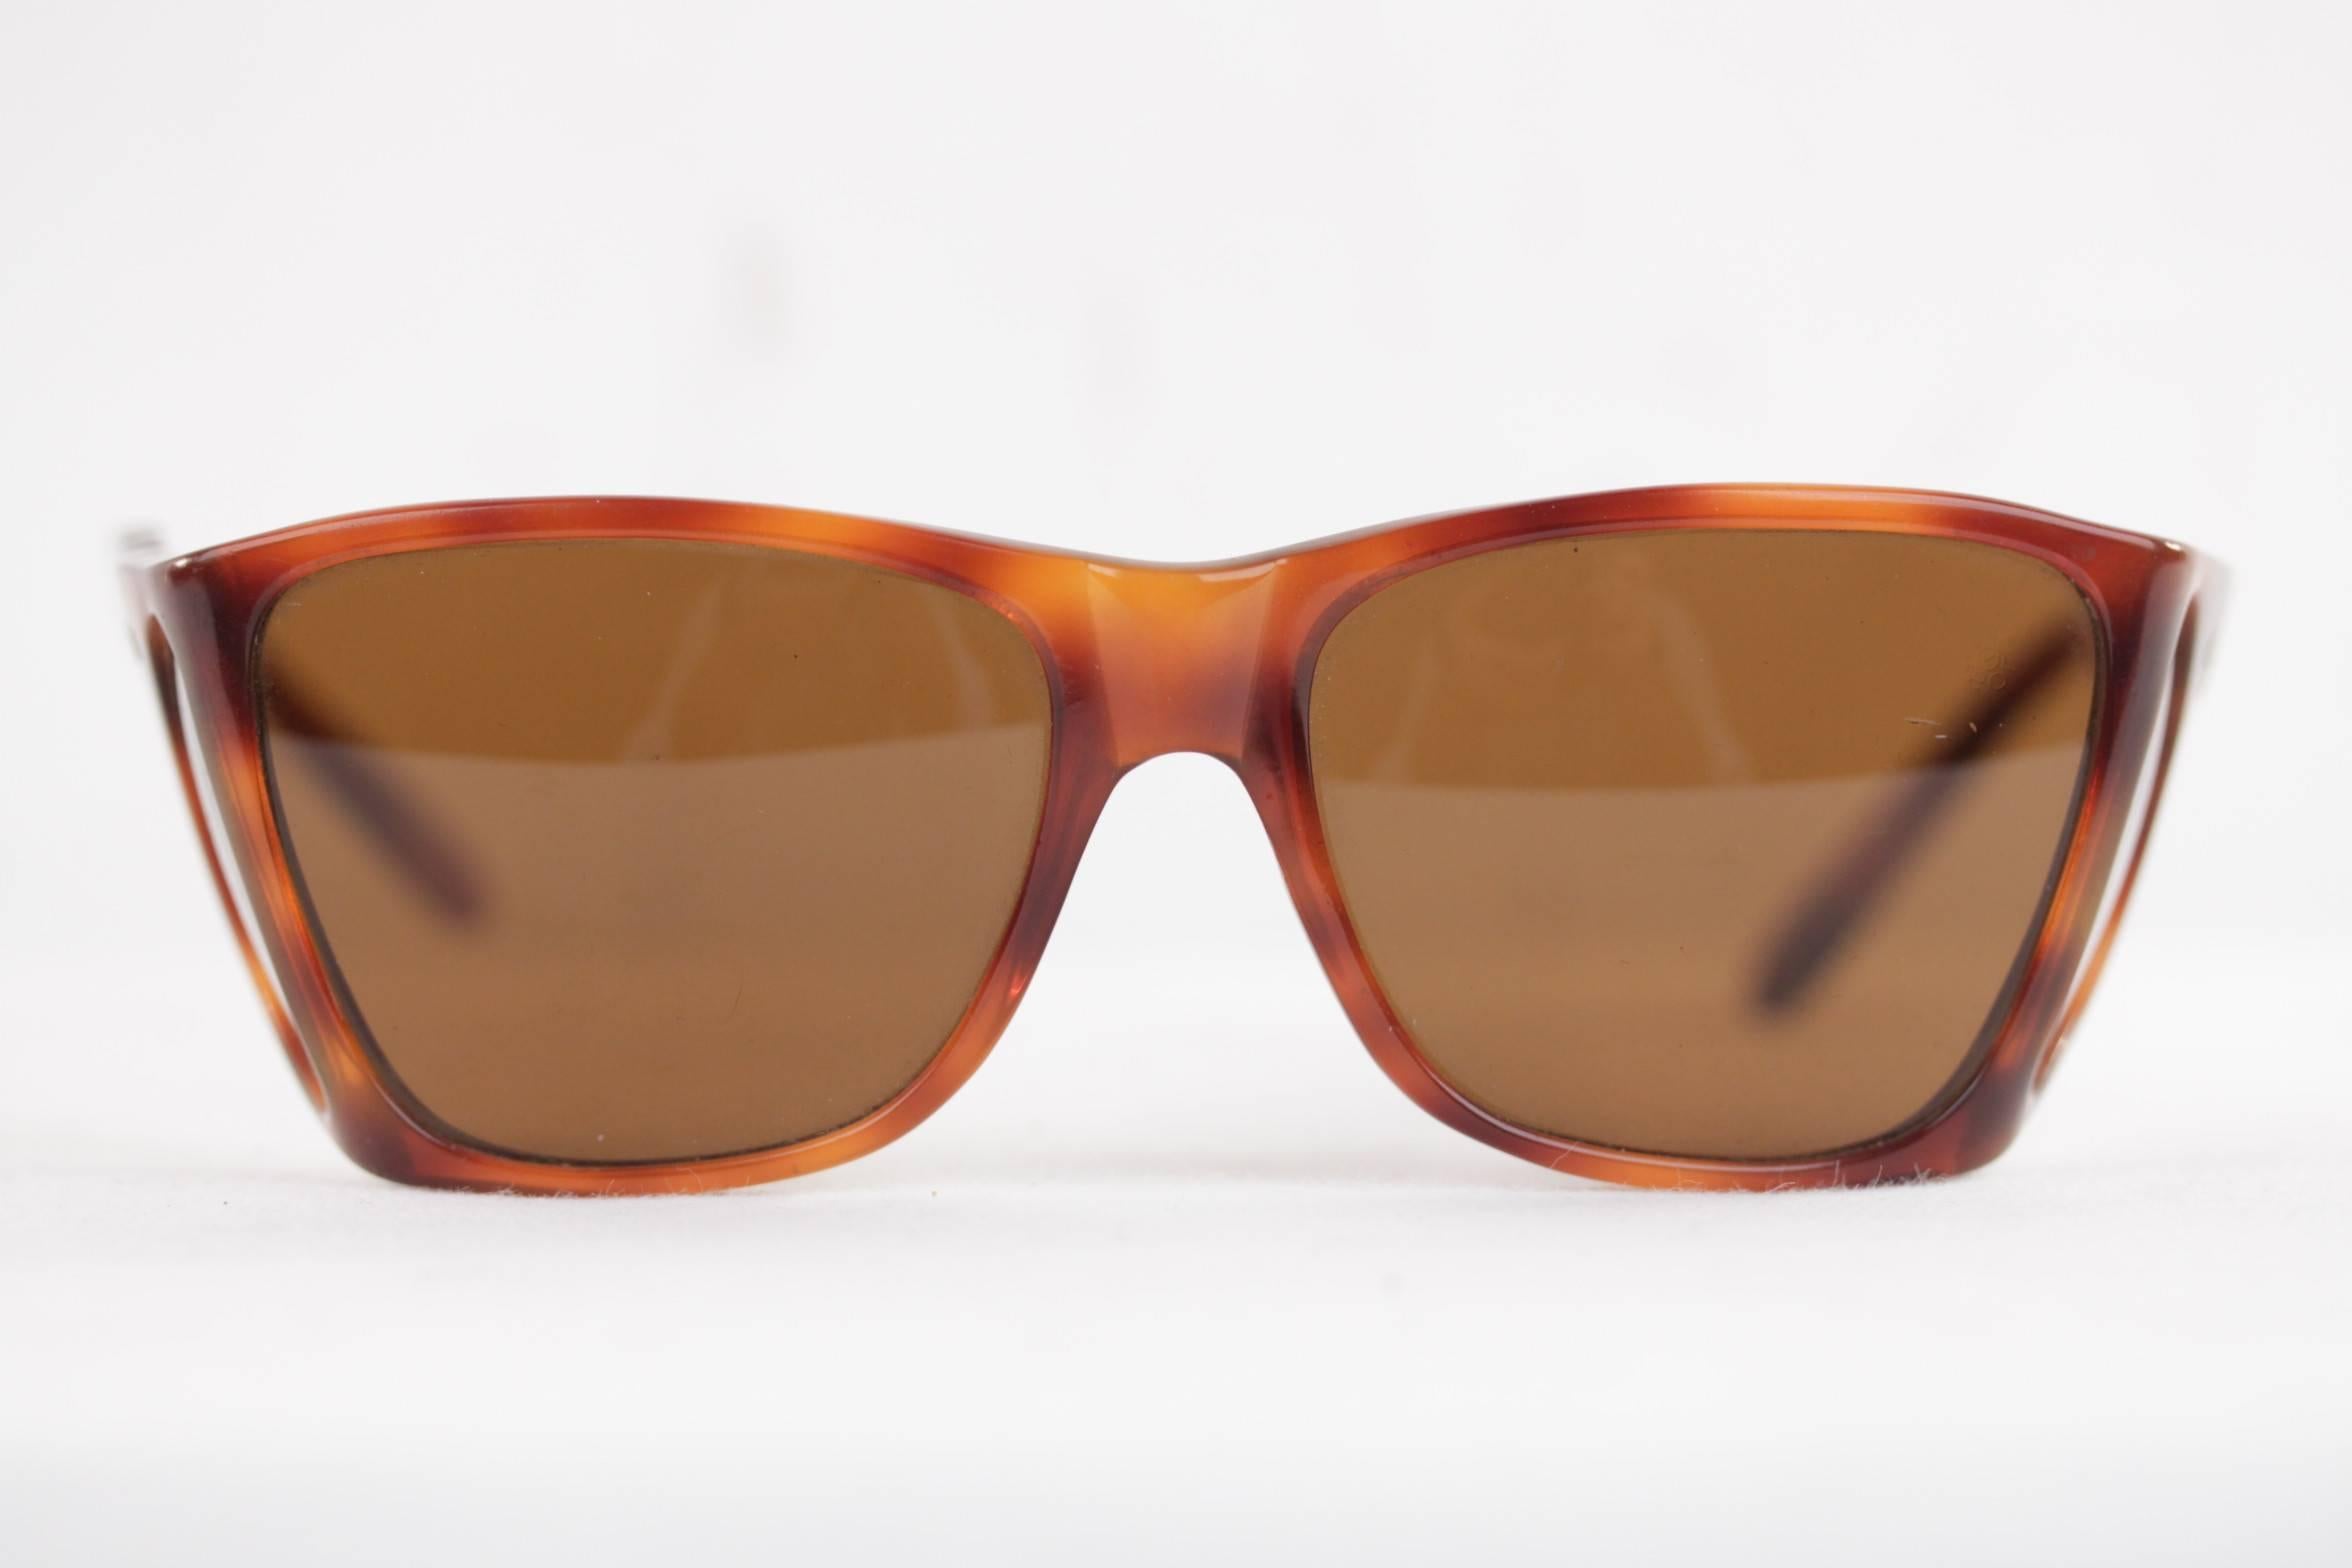 - vintage Persol Ratti sunglasses

- Original Side-shields - side/lens

- Flexible temple by patented Meflecto-System

- Brown tortoise frame

- Original 100% UV protection brown lenses (PERSOL logo on both lenses)

- Comes with a PERSOL